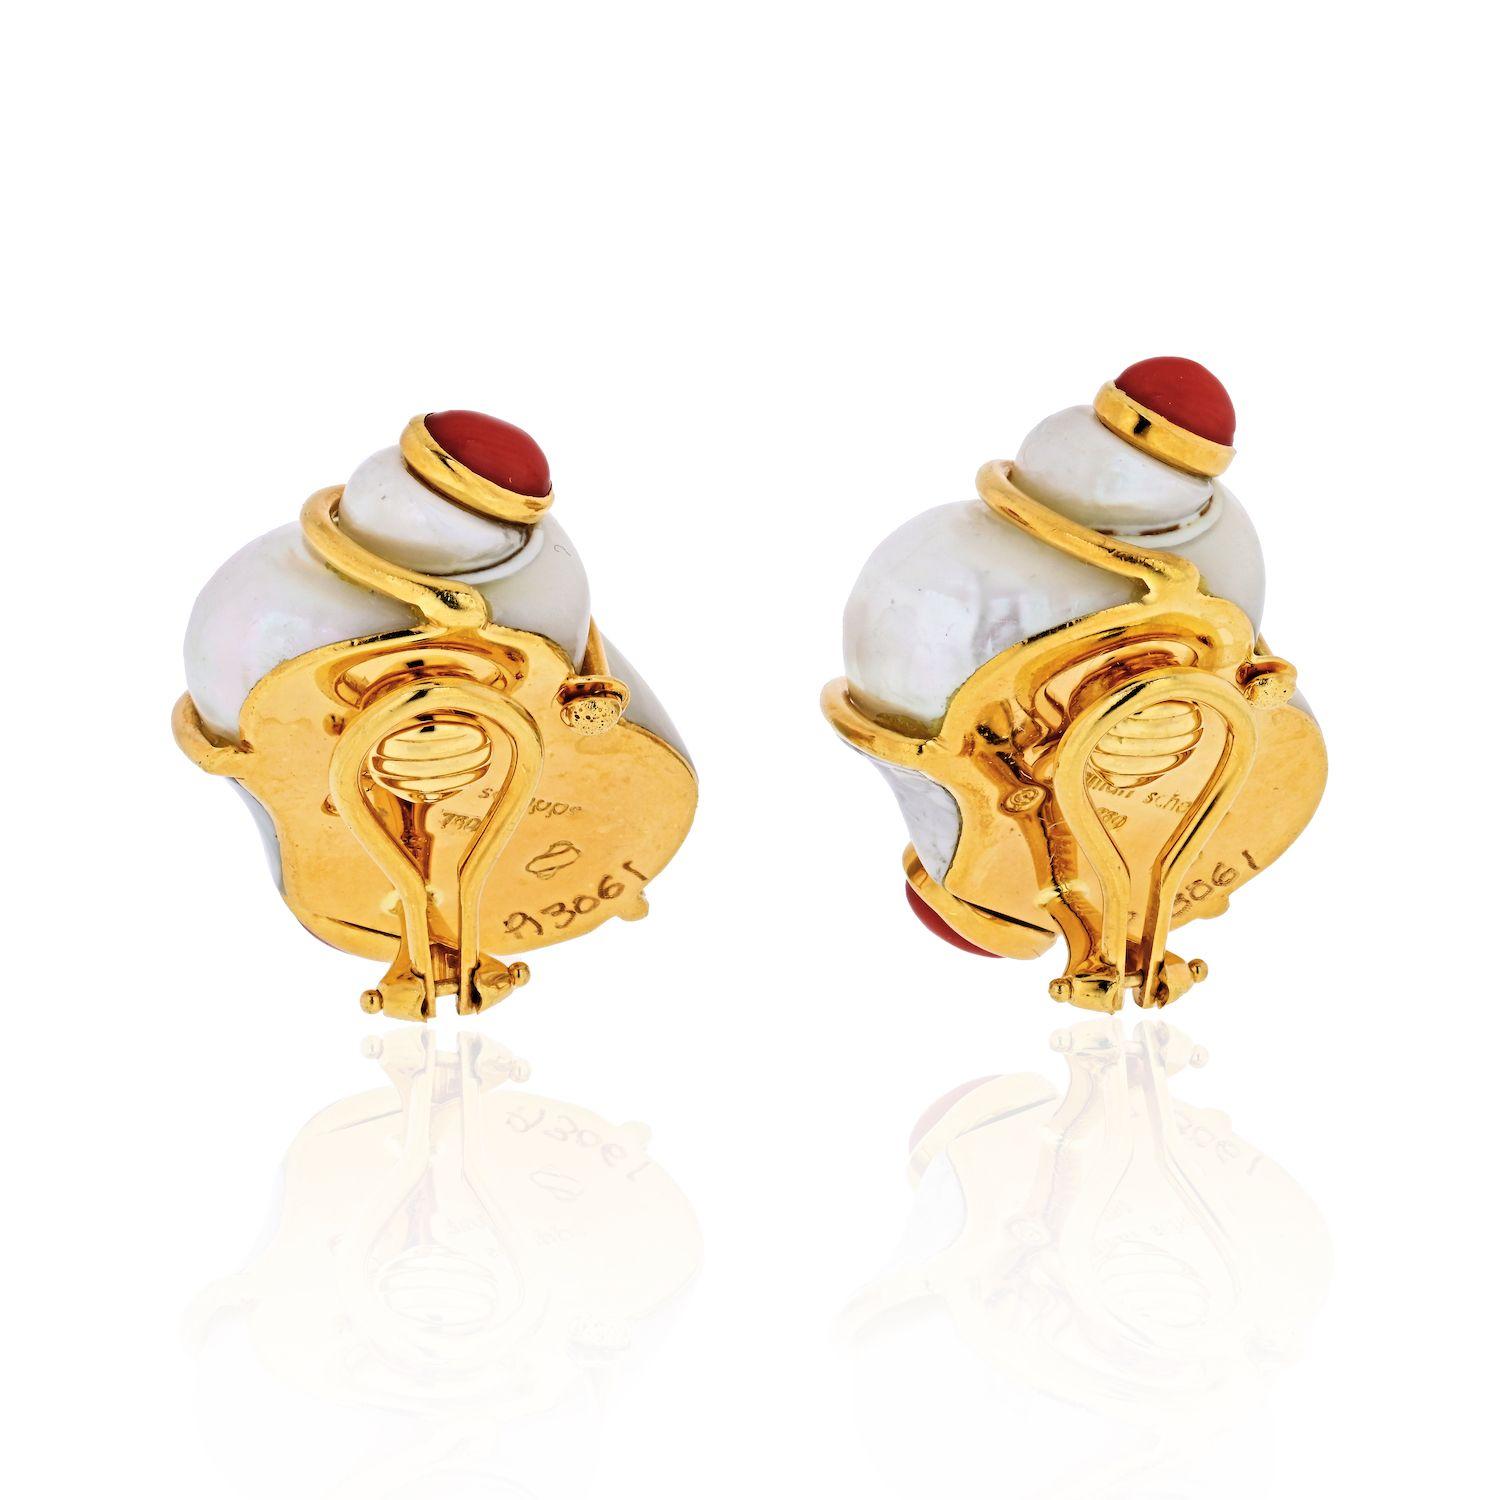 Oval Cut Seaman Schepps 18 Karat Yellow Gold Turbo Shell and Coral Earrings